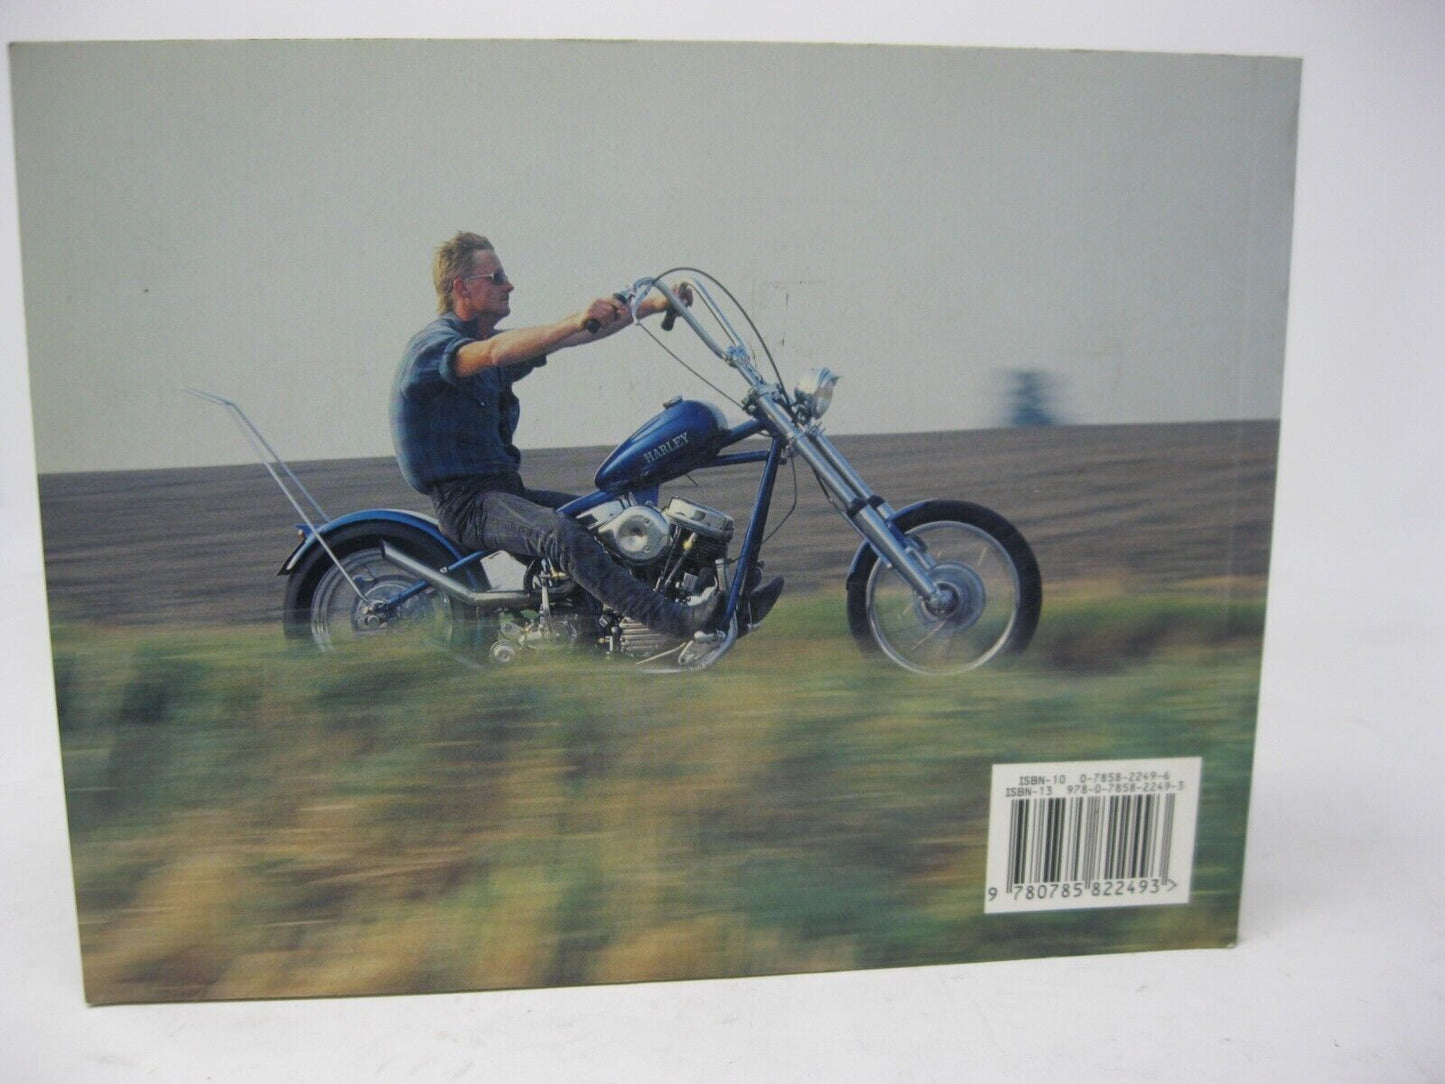 The Ultimate Guide To Choppers 2 Pack 2007 + 2009